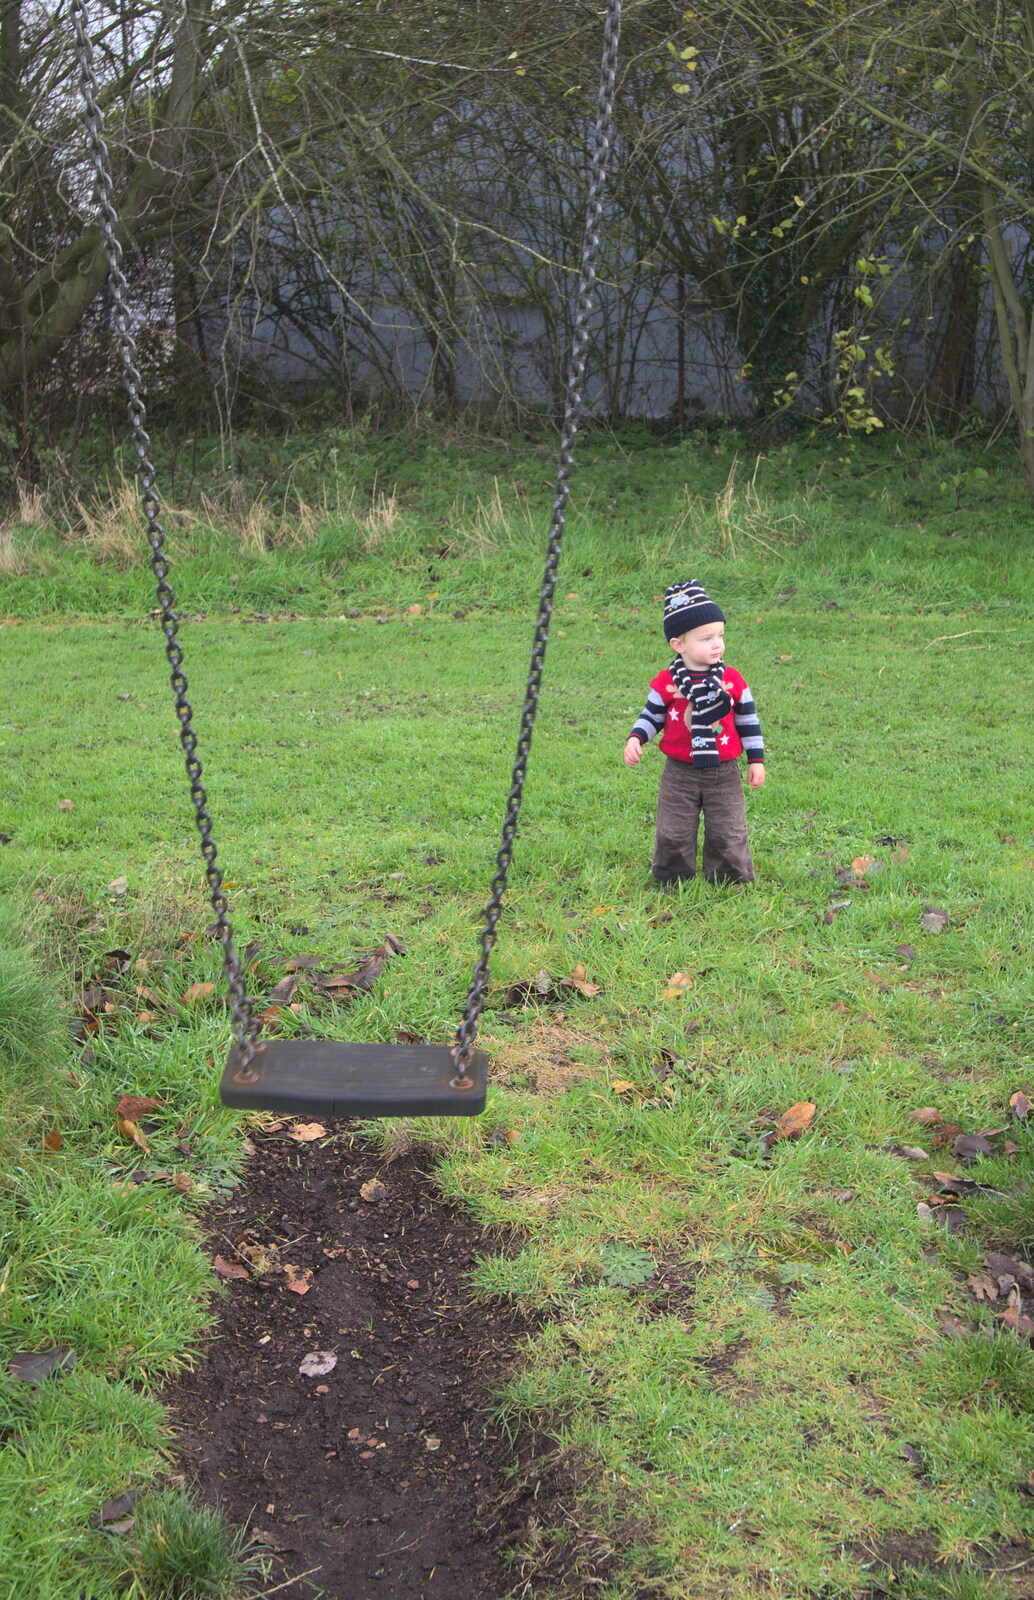 More Building and Palgrave Playground, Suffolk - 24th November 2013: Harry stands next to the swing